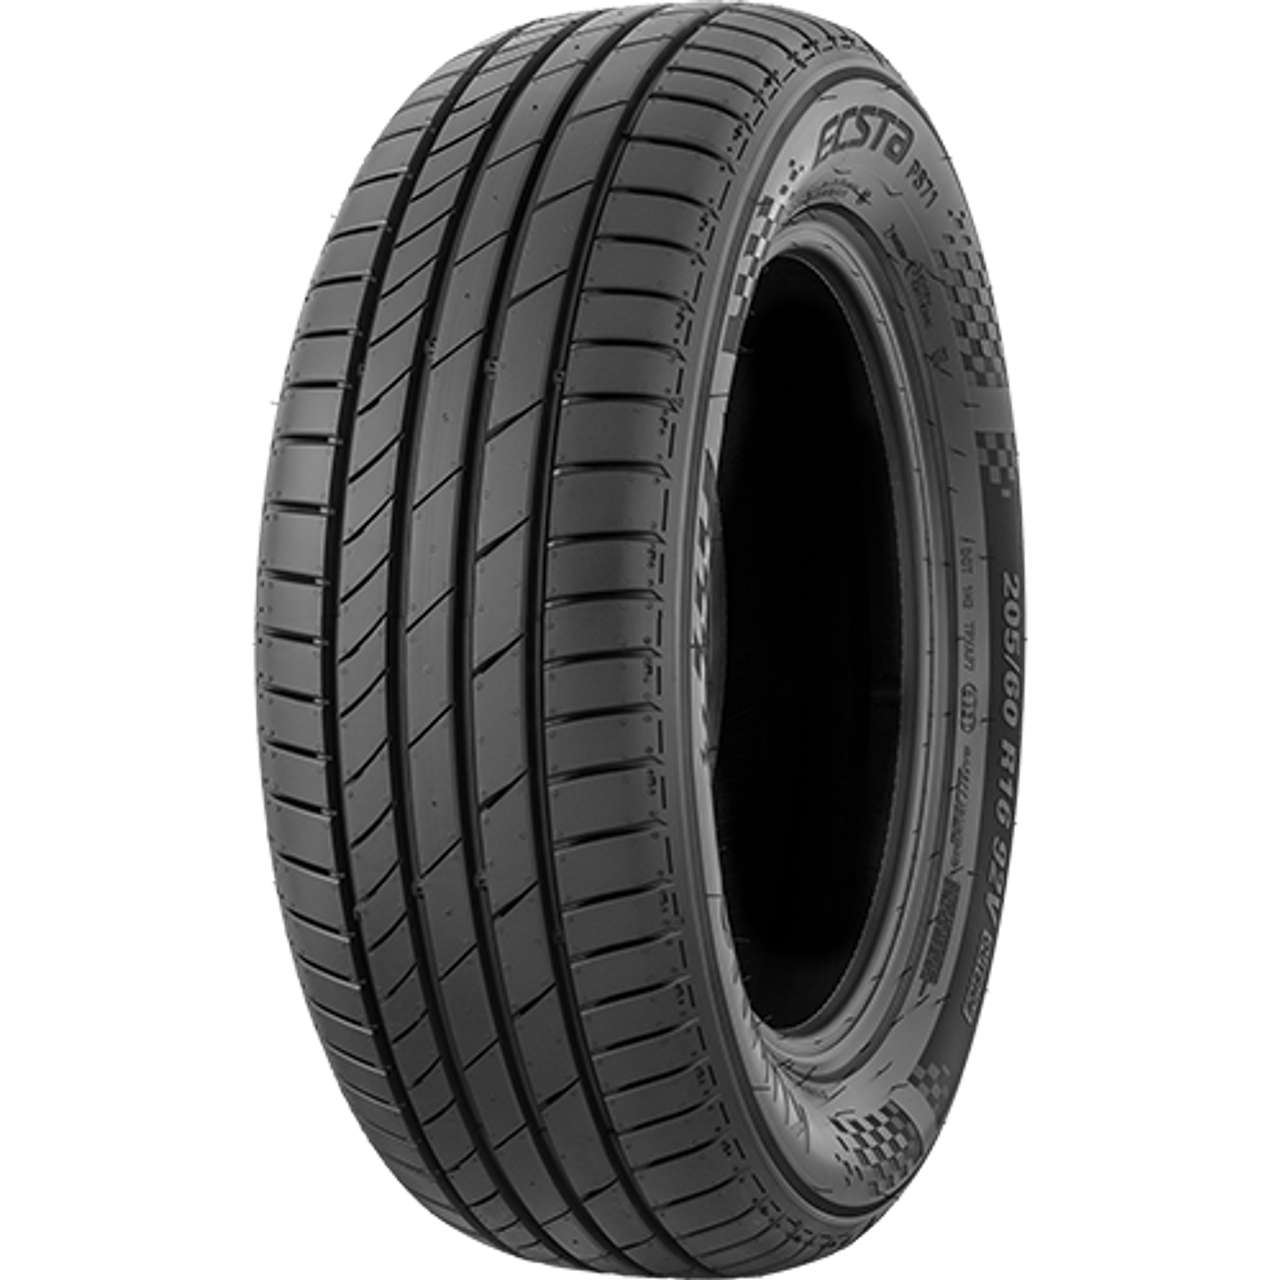 KUMHO ECSTA PS71 315/35ZR22 111Y BSW